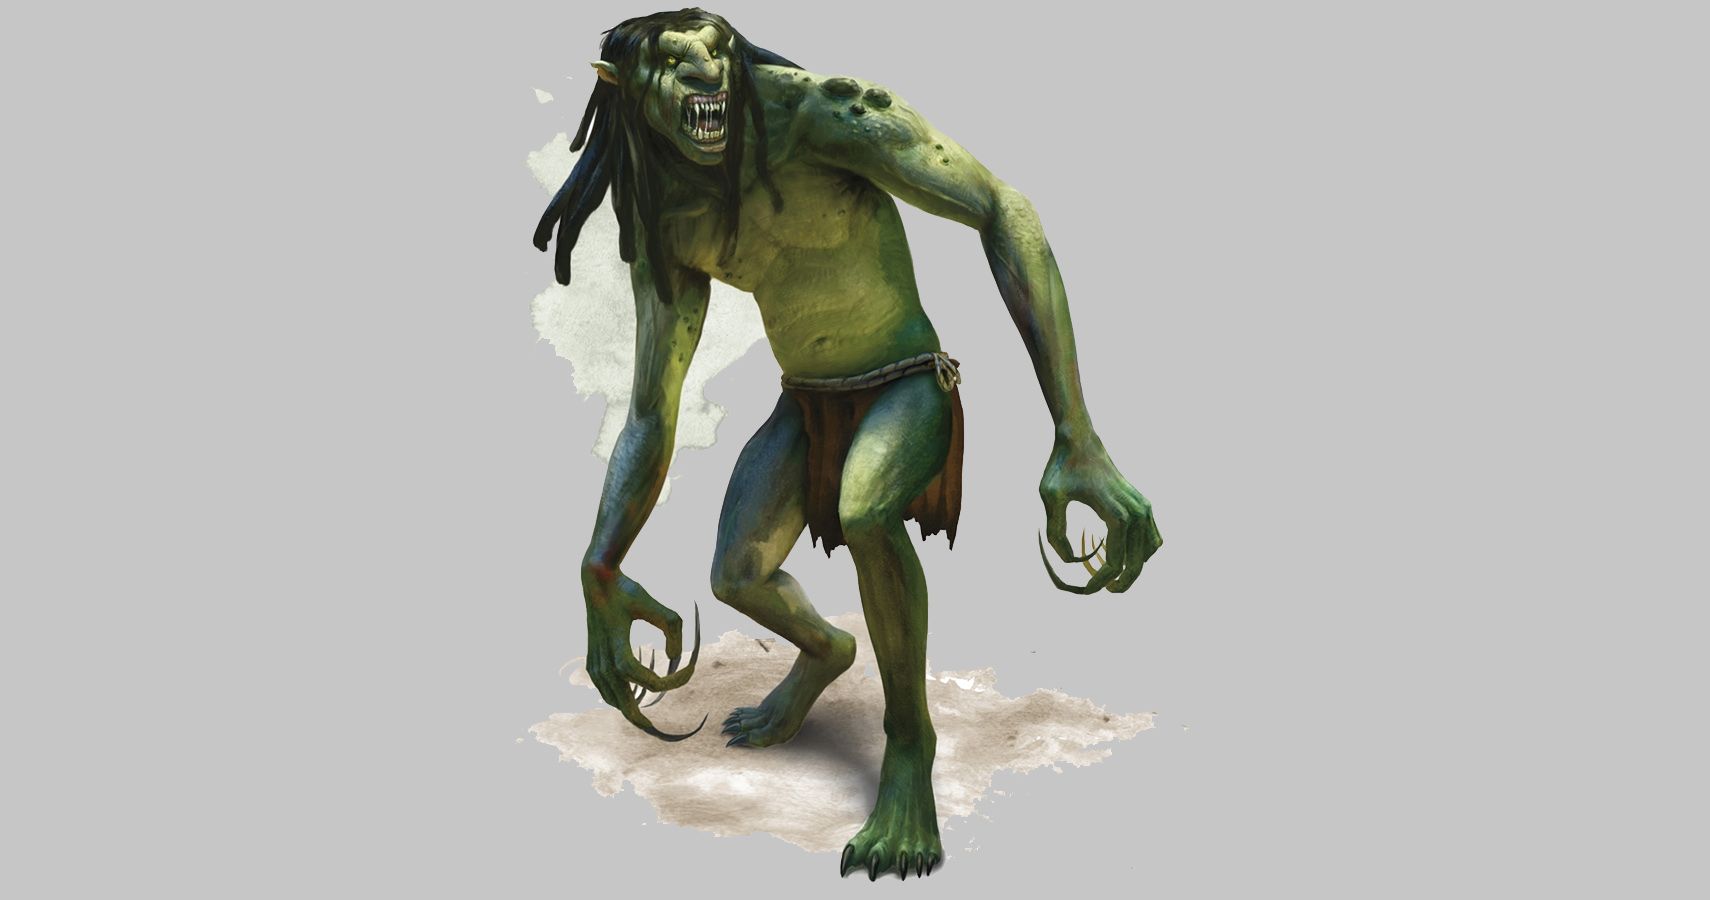 A standard troll from the Dungeons and Dragons setting